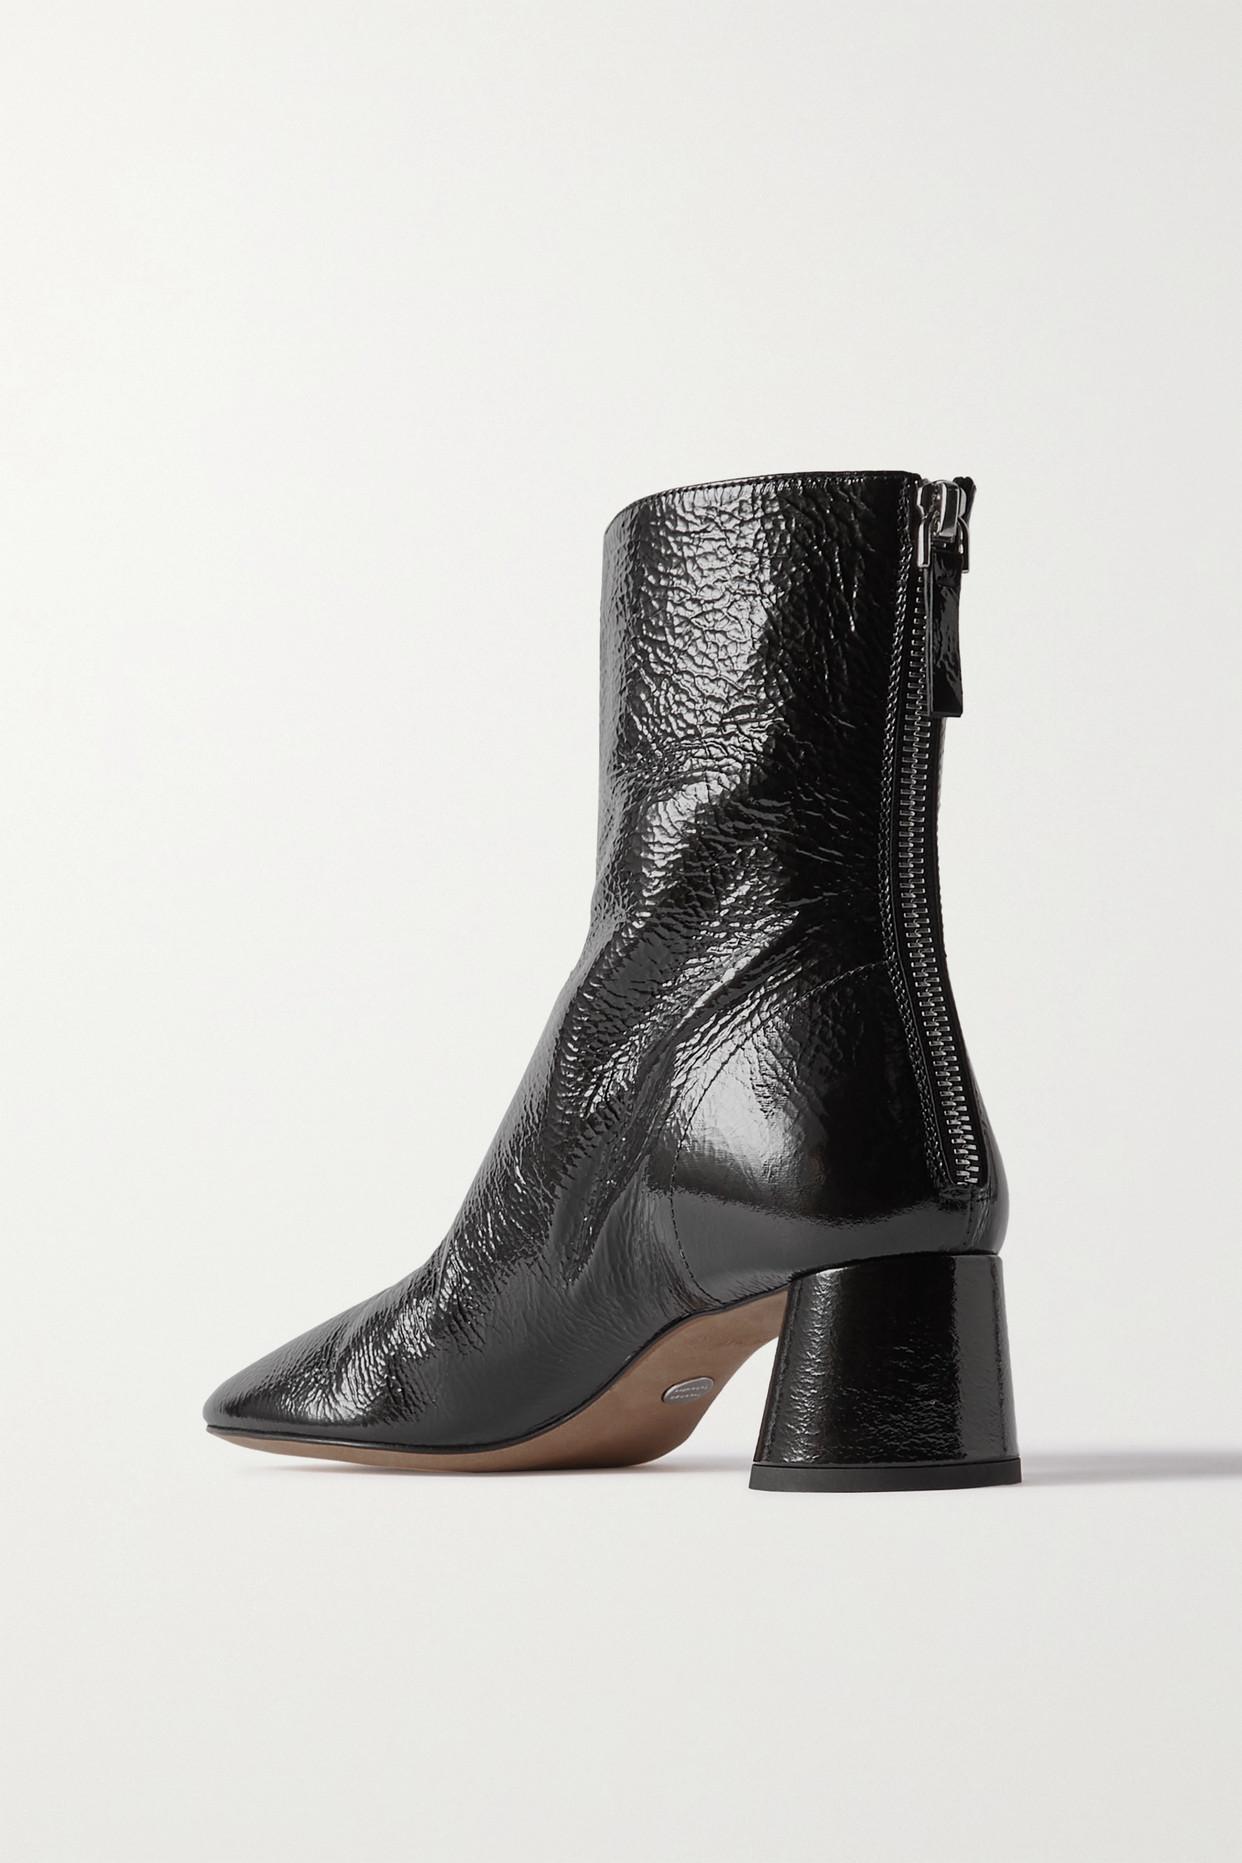 Proenza Schouler Glove Crinkled Patent-leather Ankle Boots in Black | Lyst